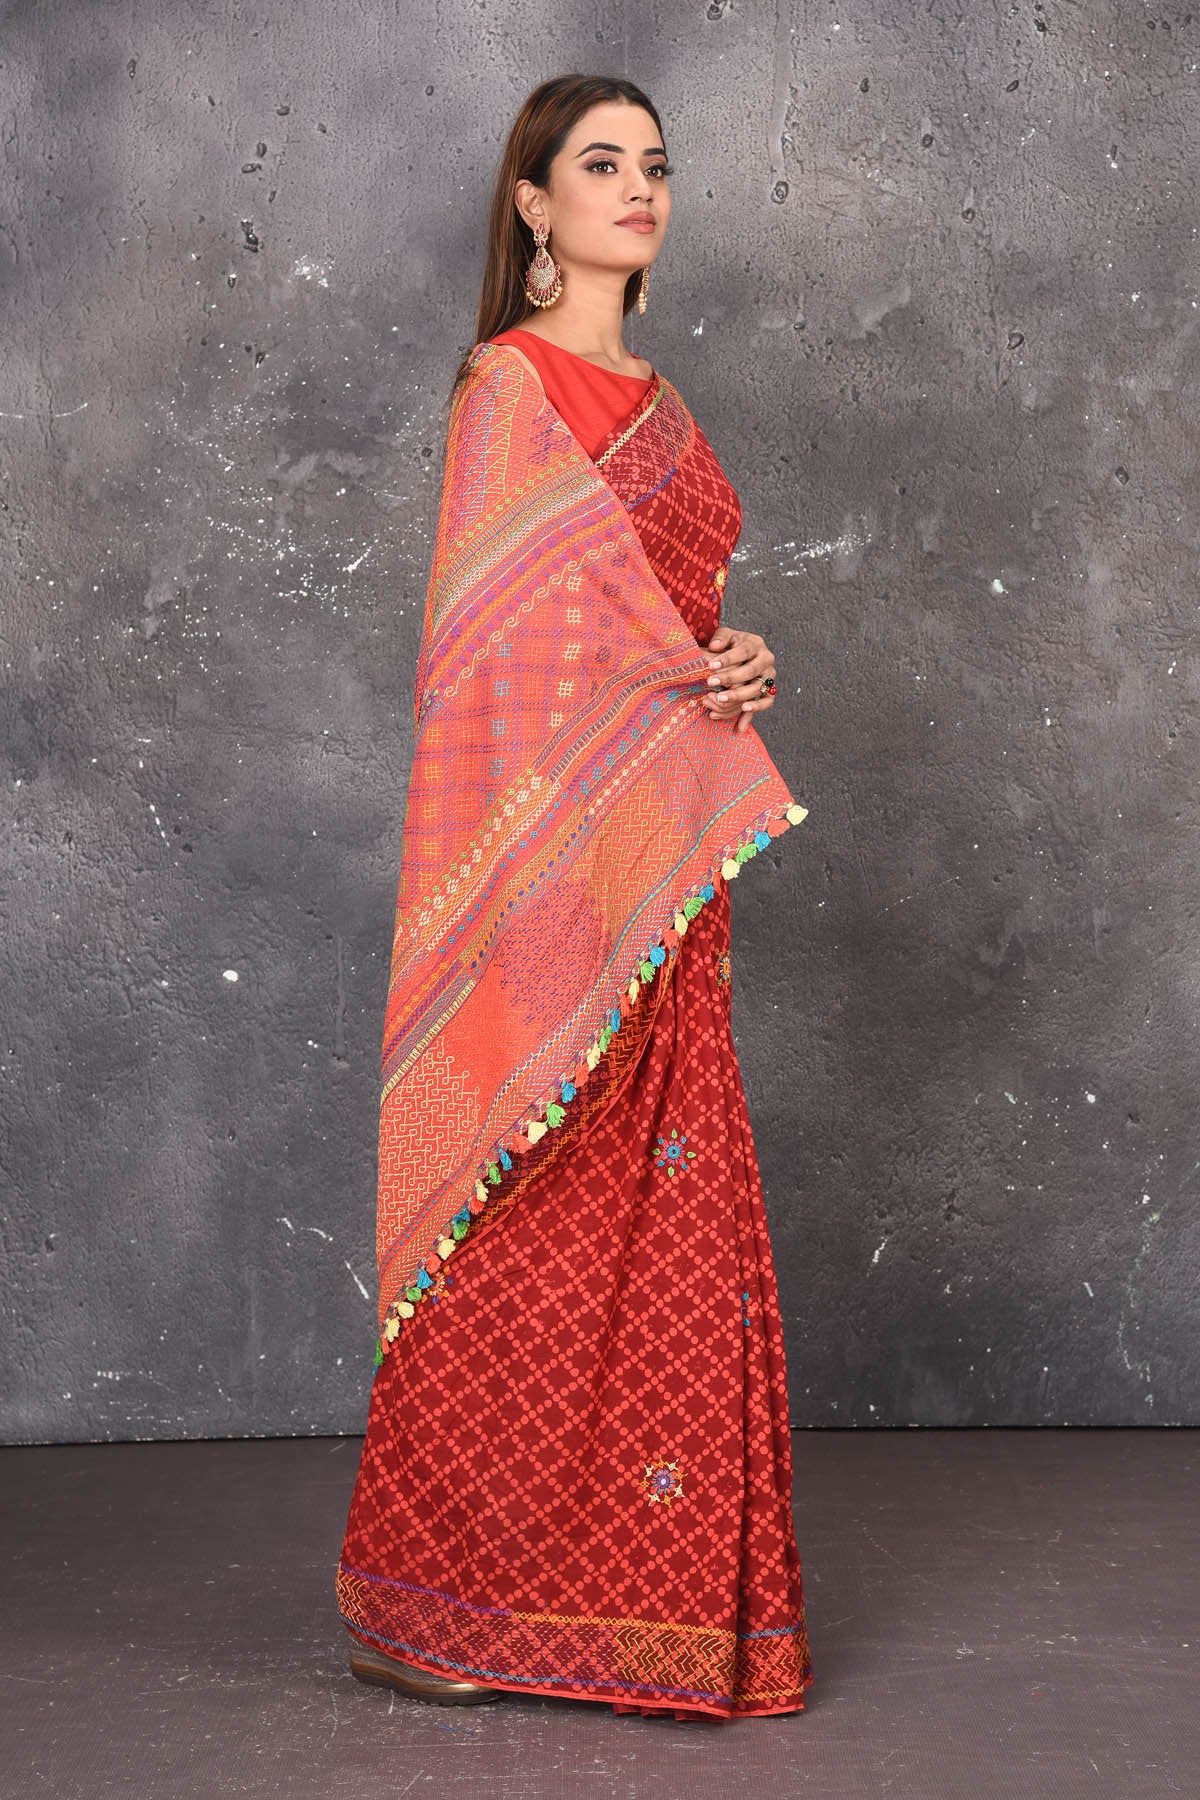 Shop this classy red hand painted madhubani cotton saree online in USA. Perfect to be worn as part of your everyday work wear, with this hand-painted red Madhubani saree, elegance meets traditional. Add this designer Lambani embroidery designer saree with colored tassels to your collection from Pure Elegance Indian Fashion Store in USA.- Side view.